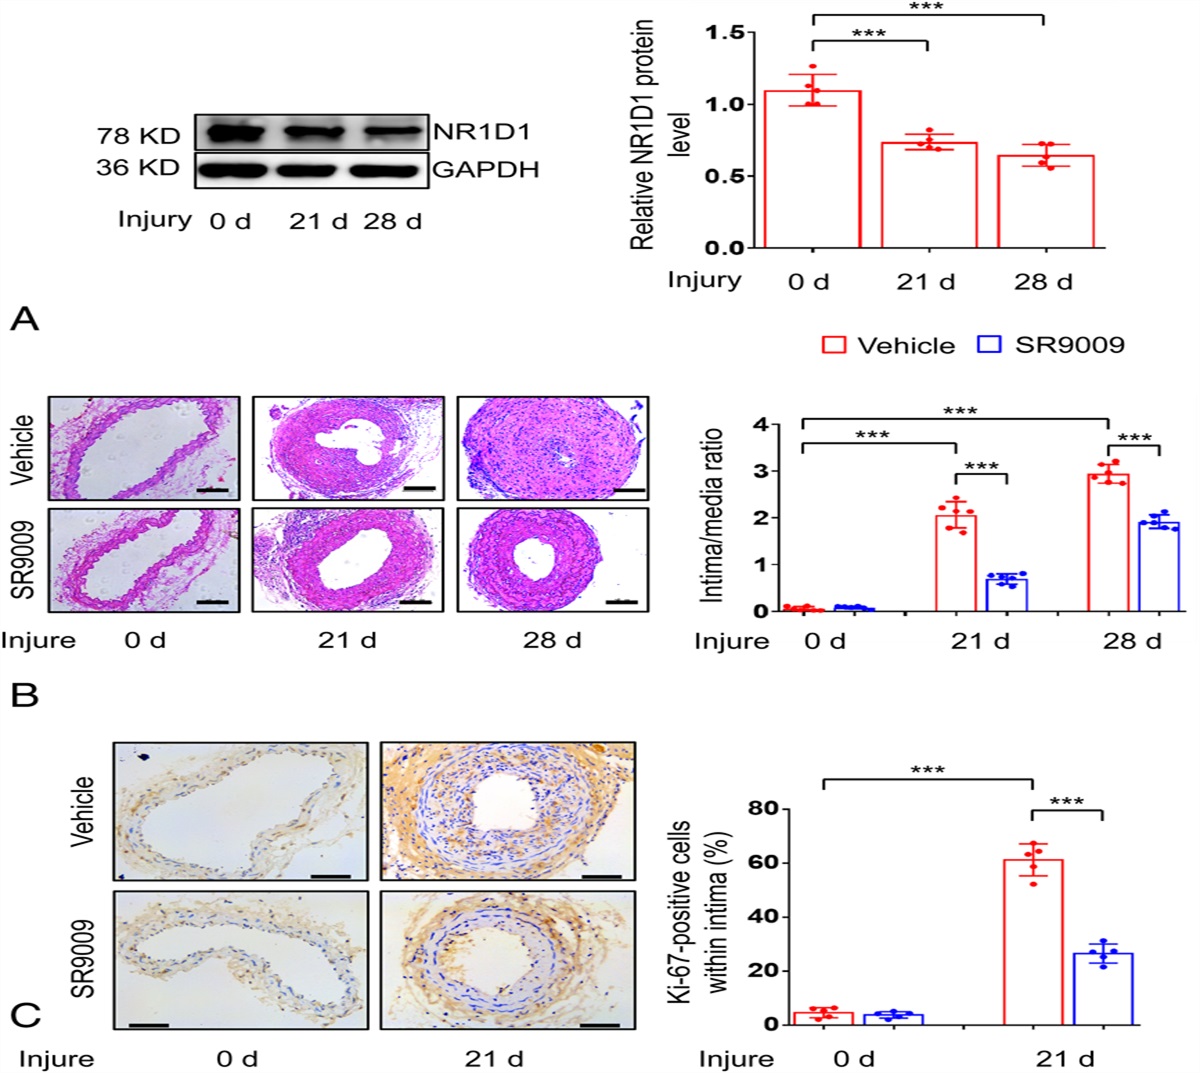 Role of Nuclear Receptor Subfamily 1 Group D Member 1 in the Proliferation, Migration of Vascular Smooth Muscle Cell, and Vascular Intimal Hyperplasia